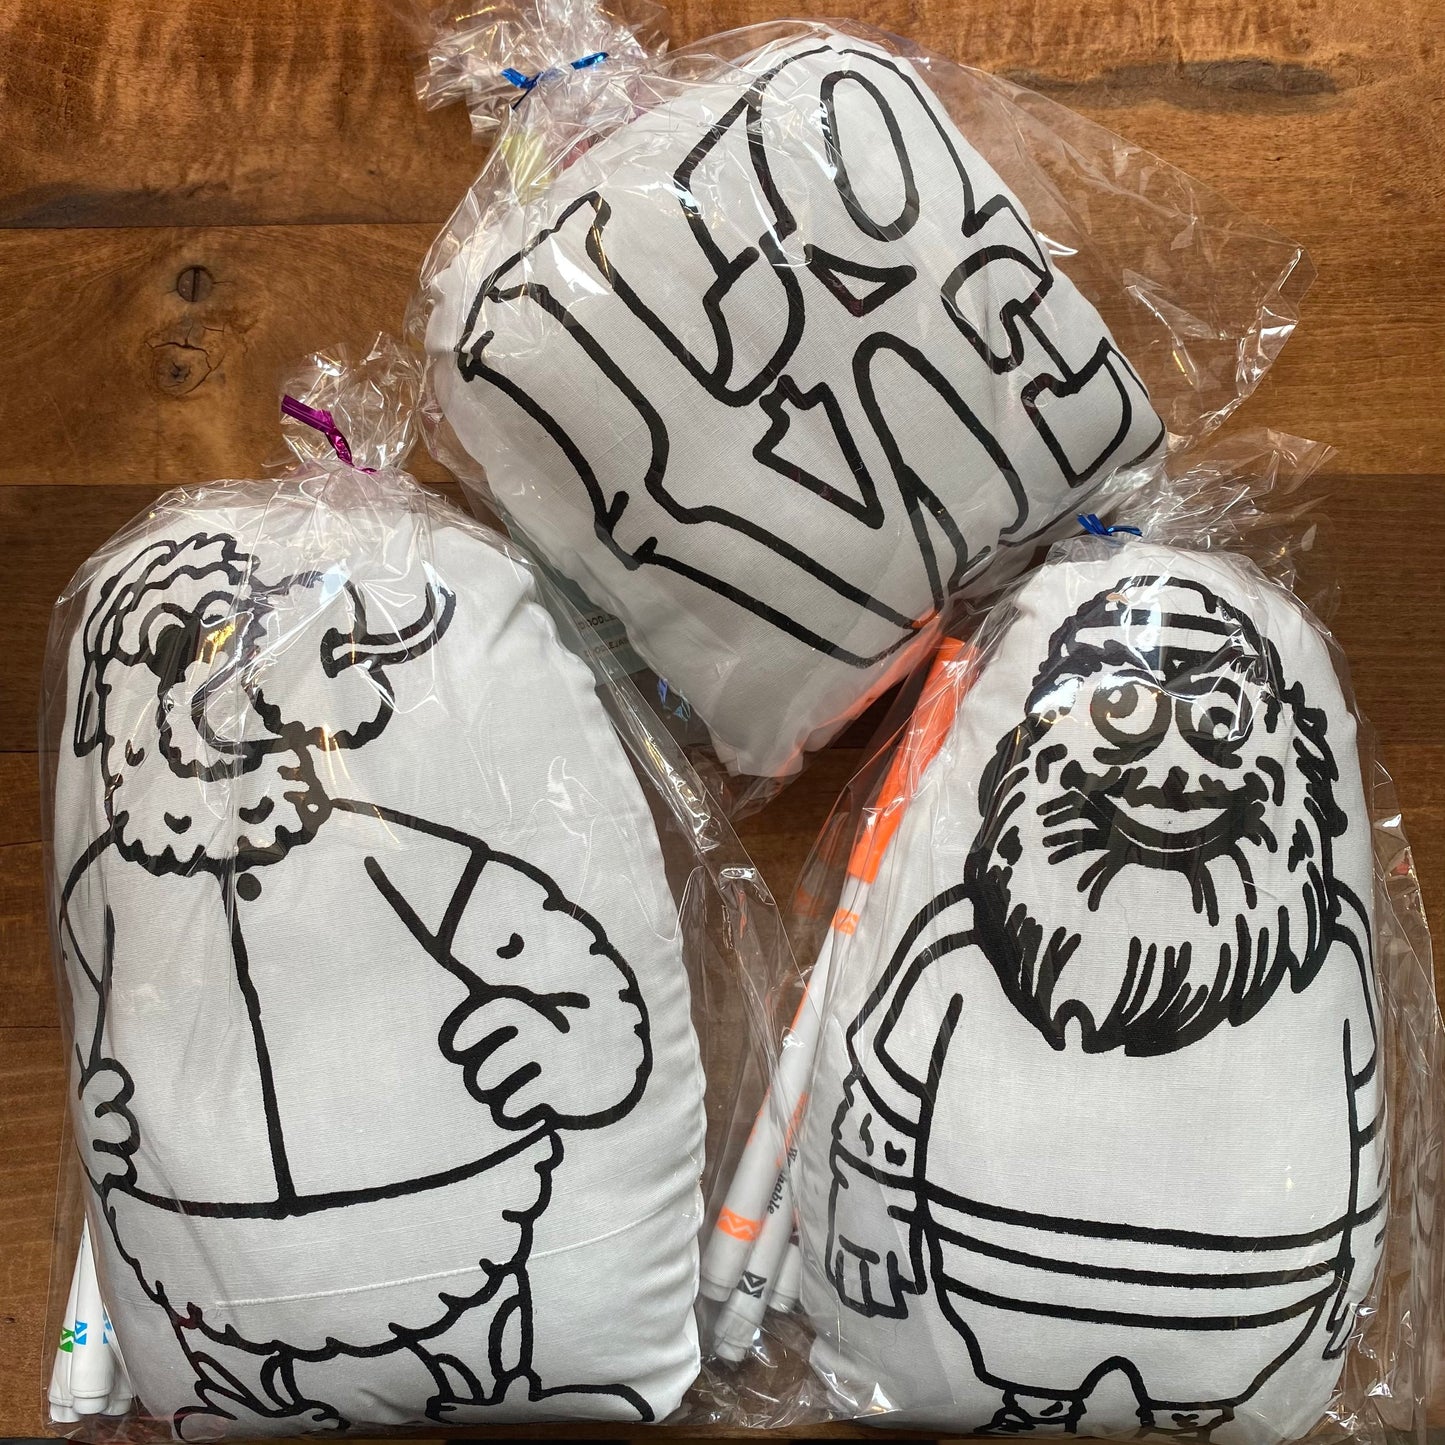 Three vacuum-packed Washable Kits featuring gritty, black-and-white cartoon illustrations of characters, displayed on a wooden table.